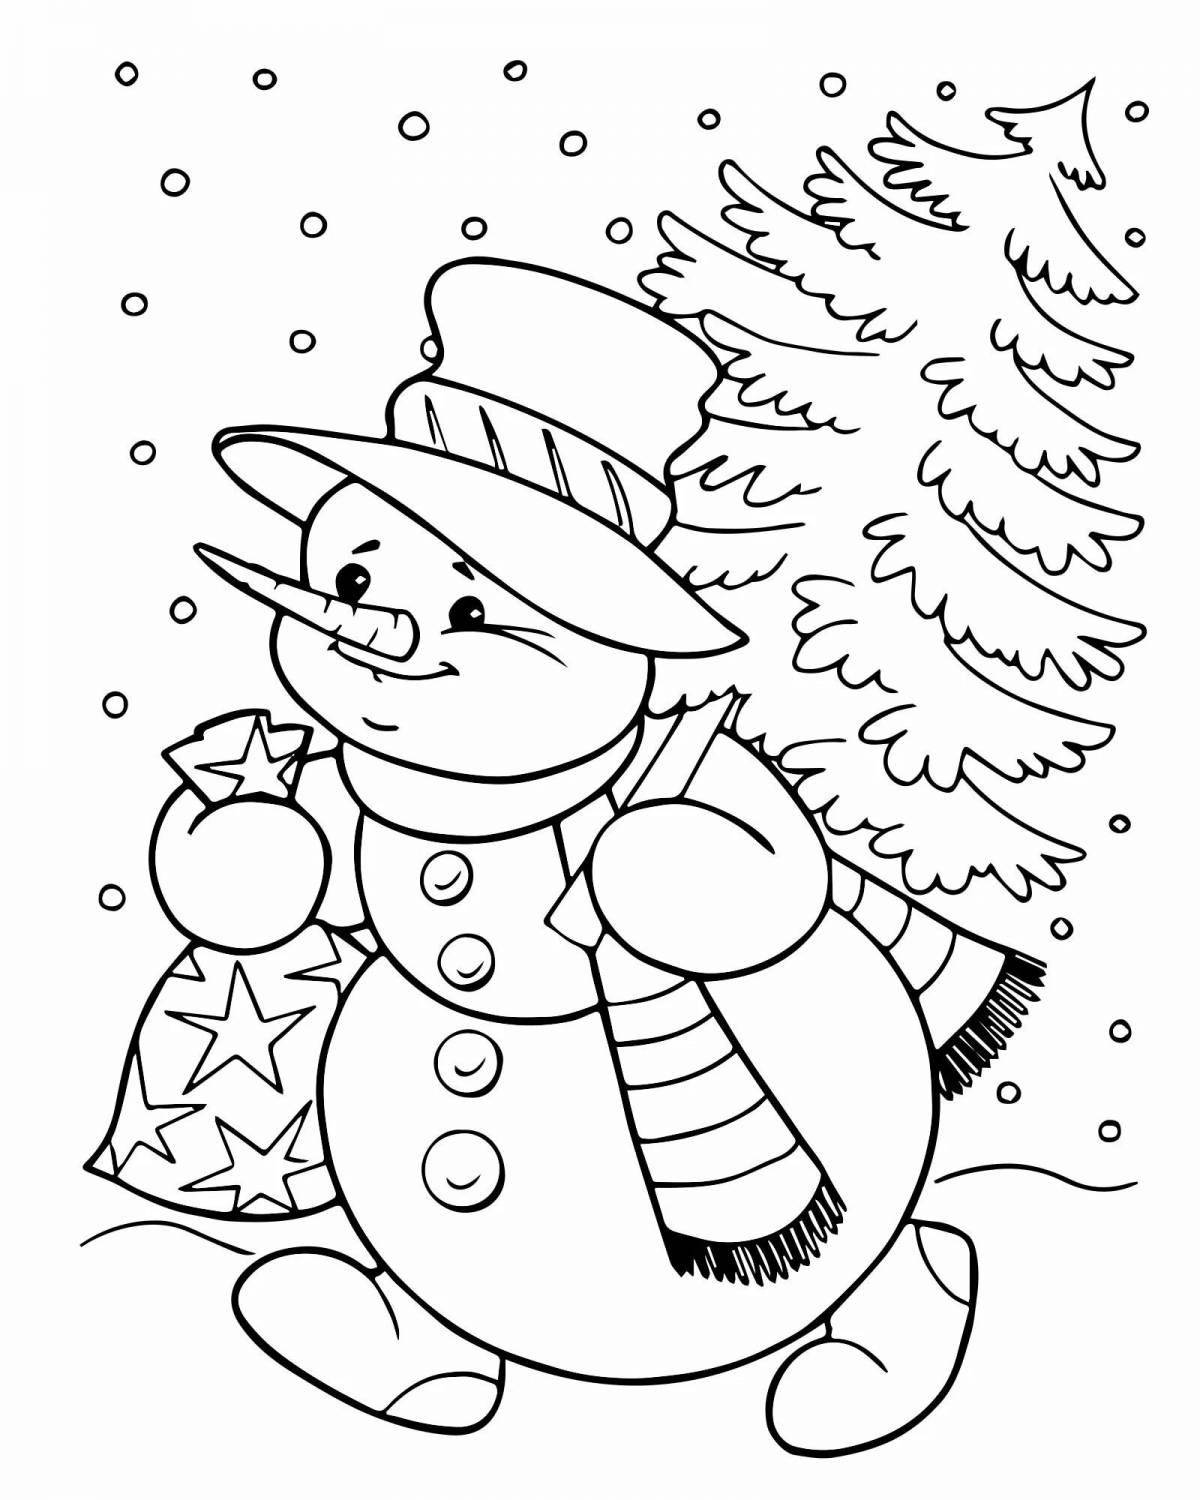 Witty snowman coloring book